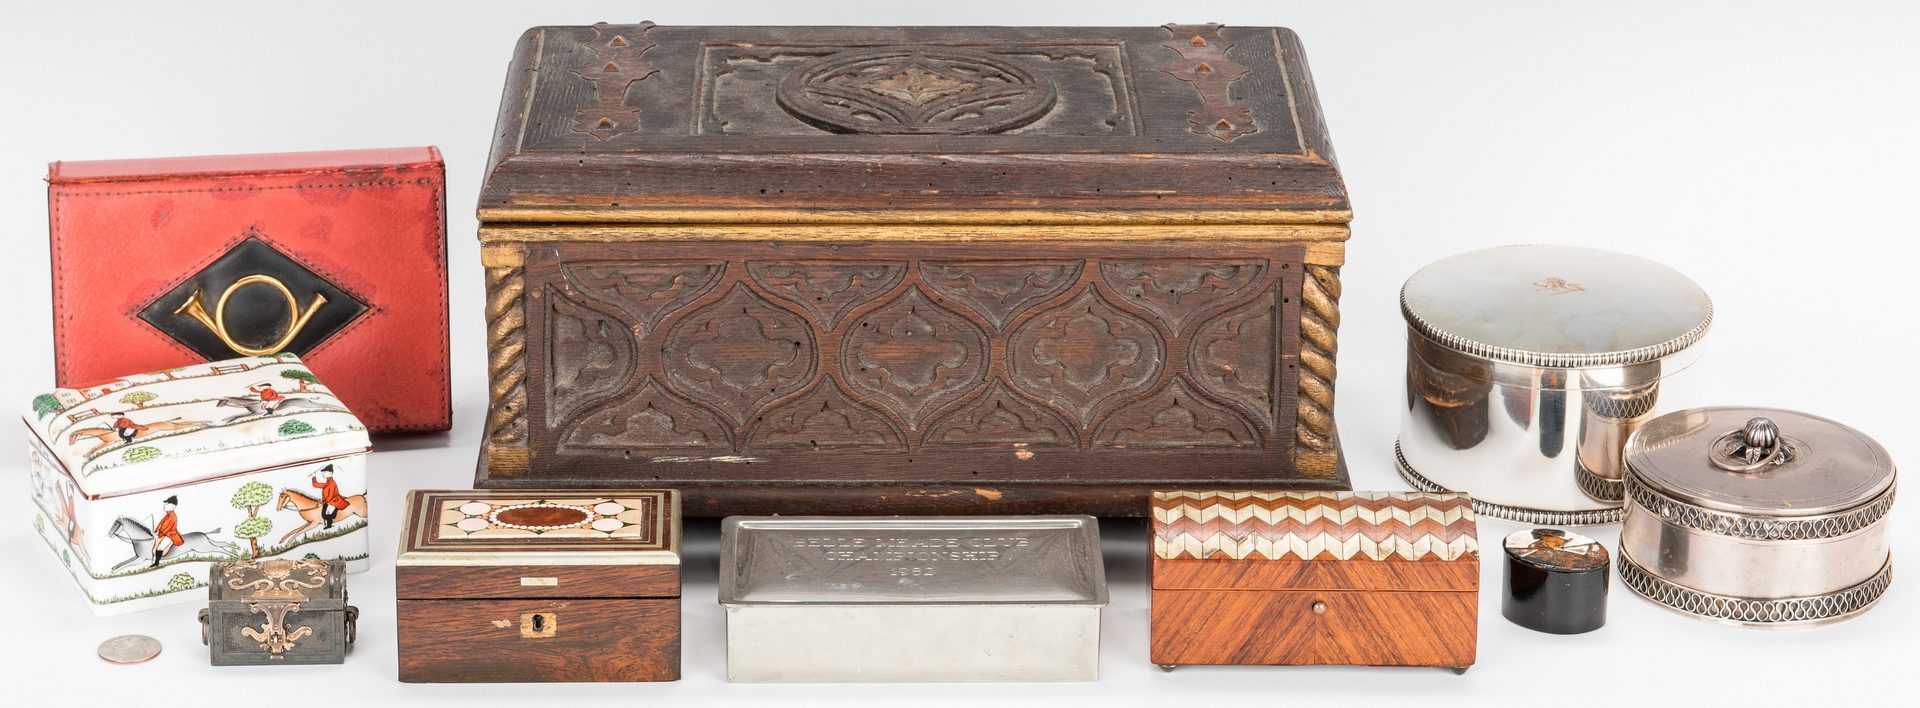 Lot 72: Group of 10 Assorted Decorative Boxes